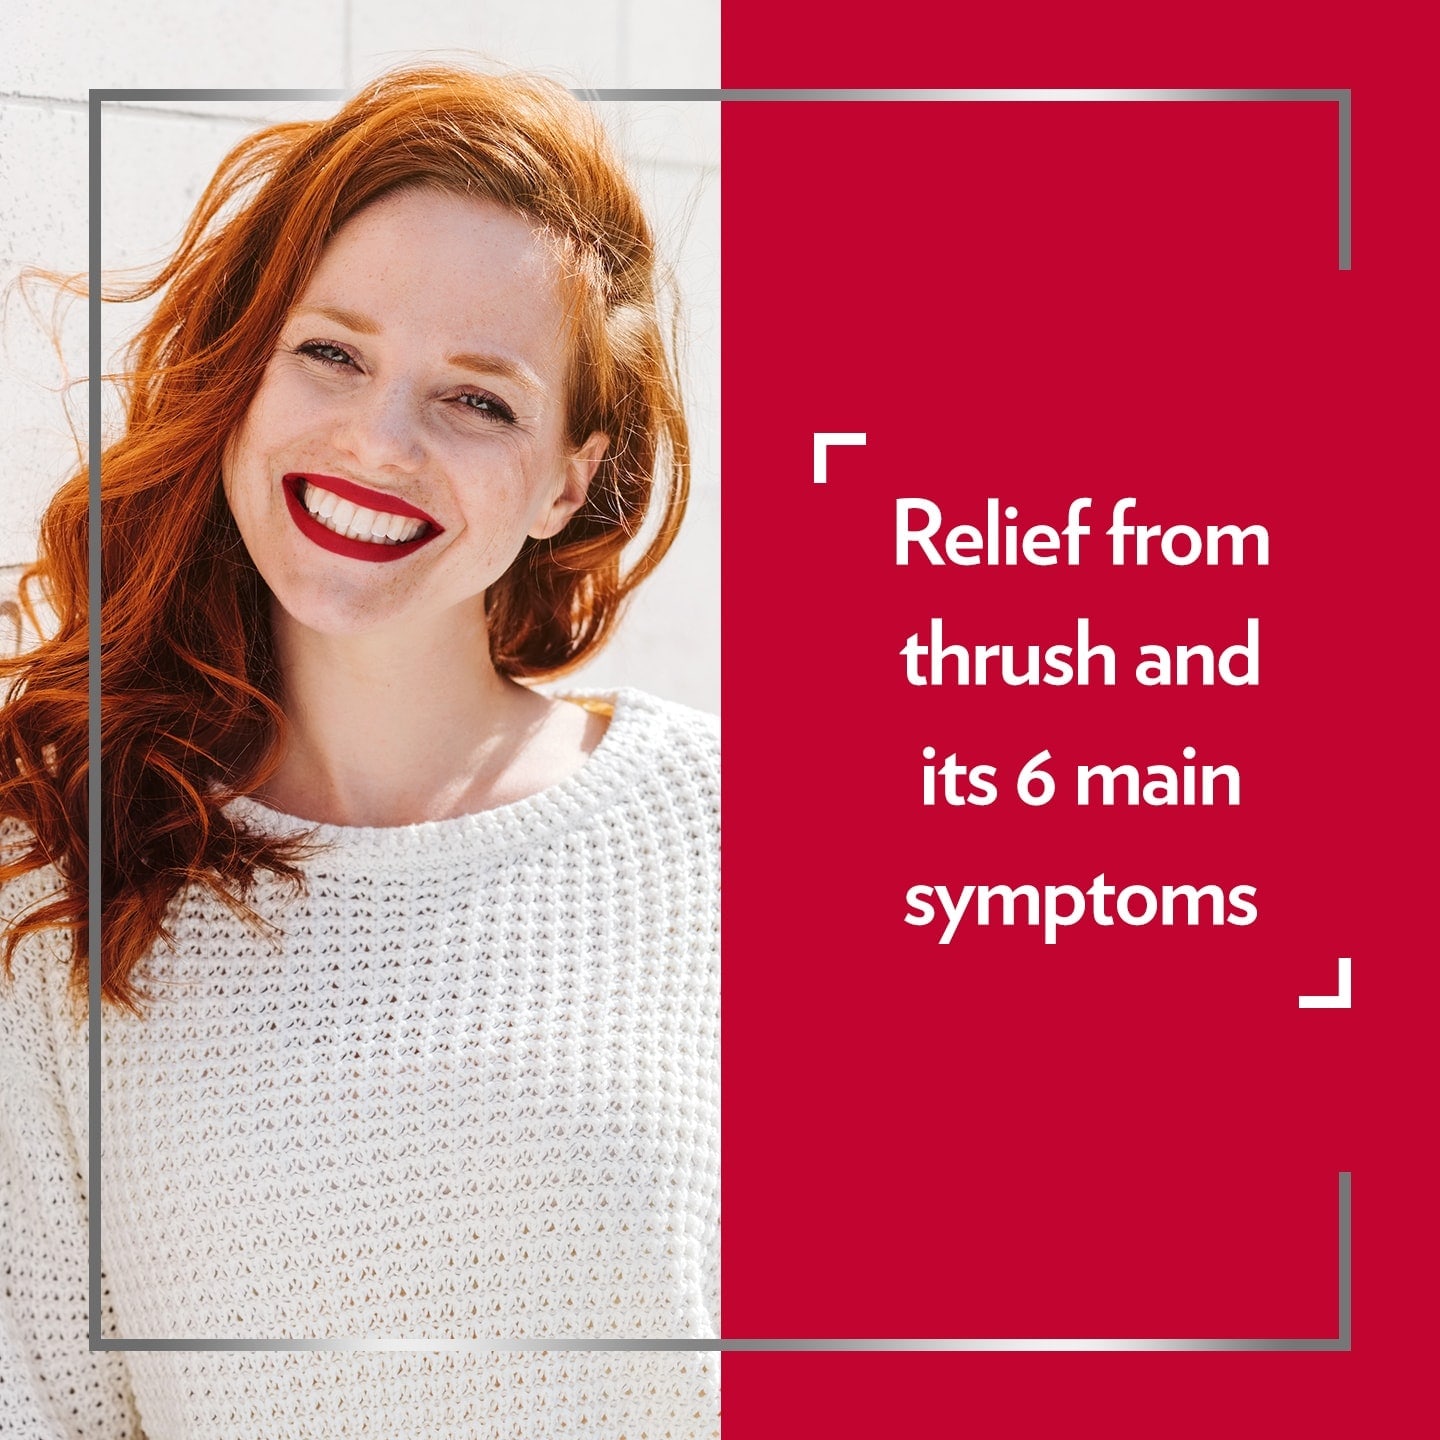 Smiling red-haired woman, with caption on the right side of picture: Complete relief from thrush and its 6 main symptoms